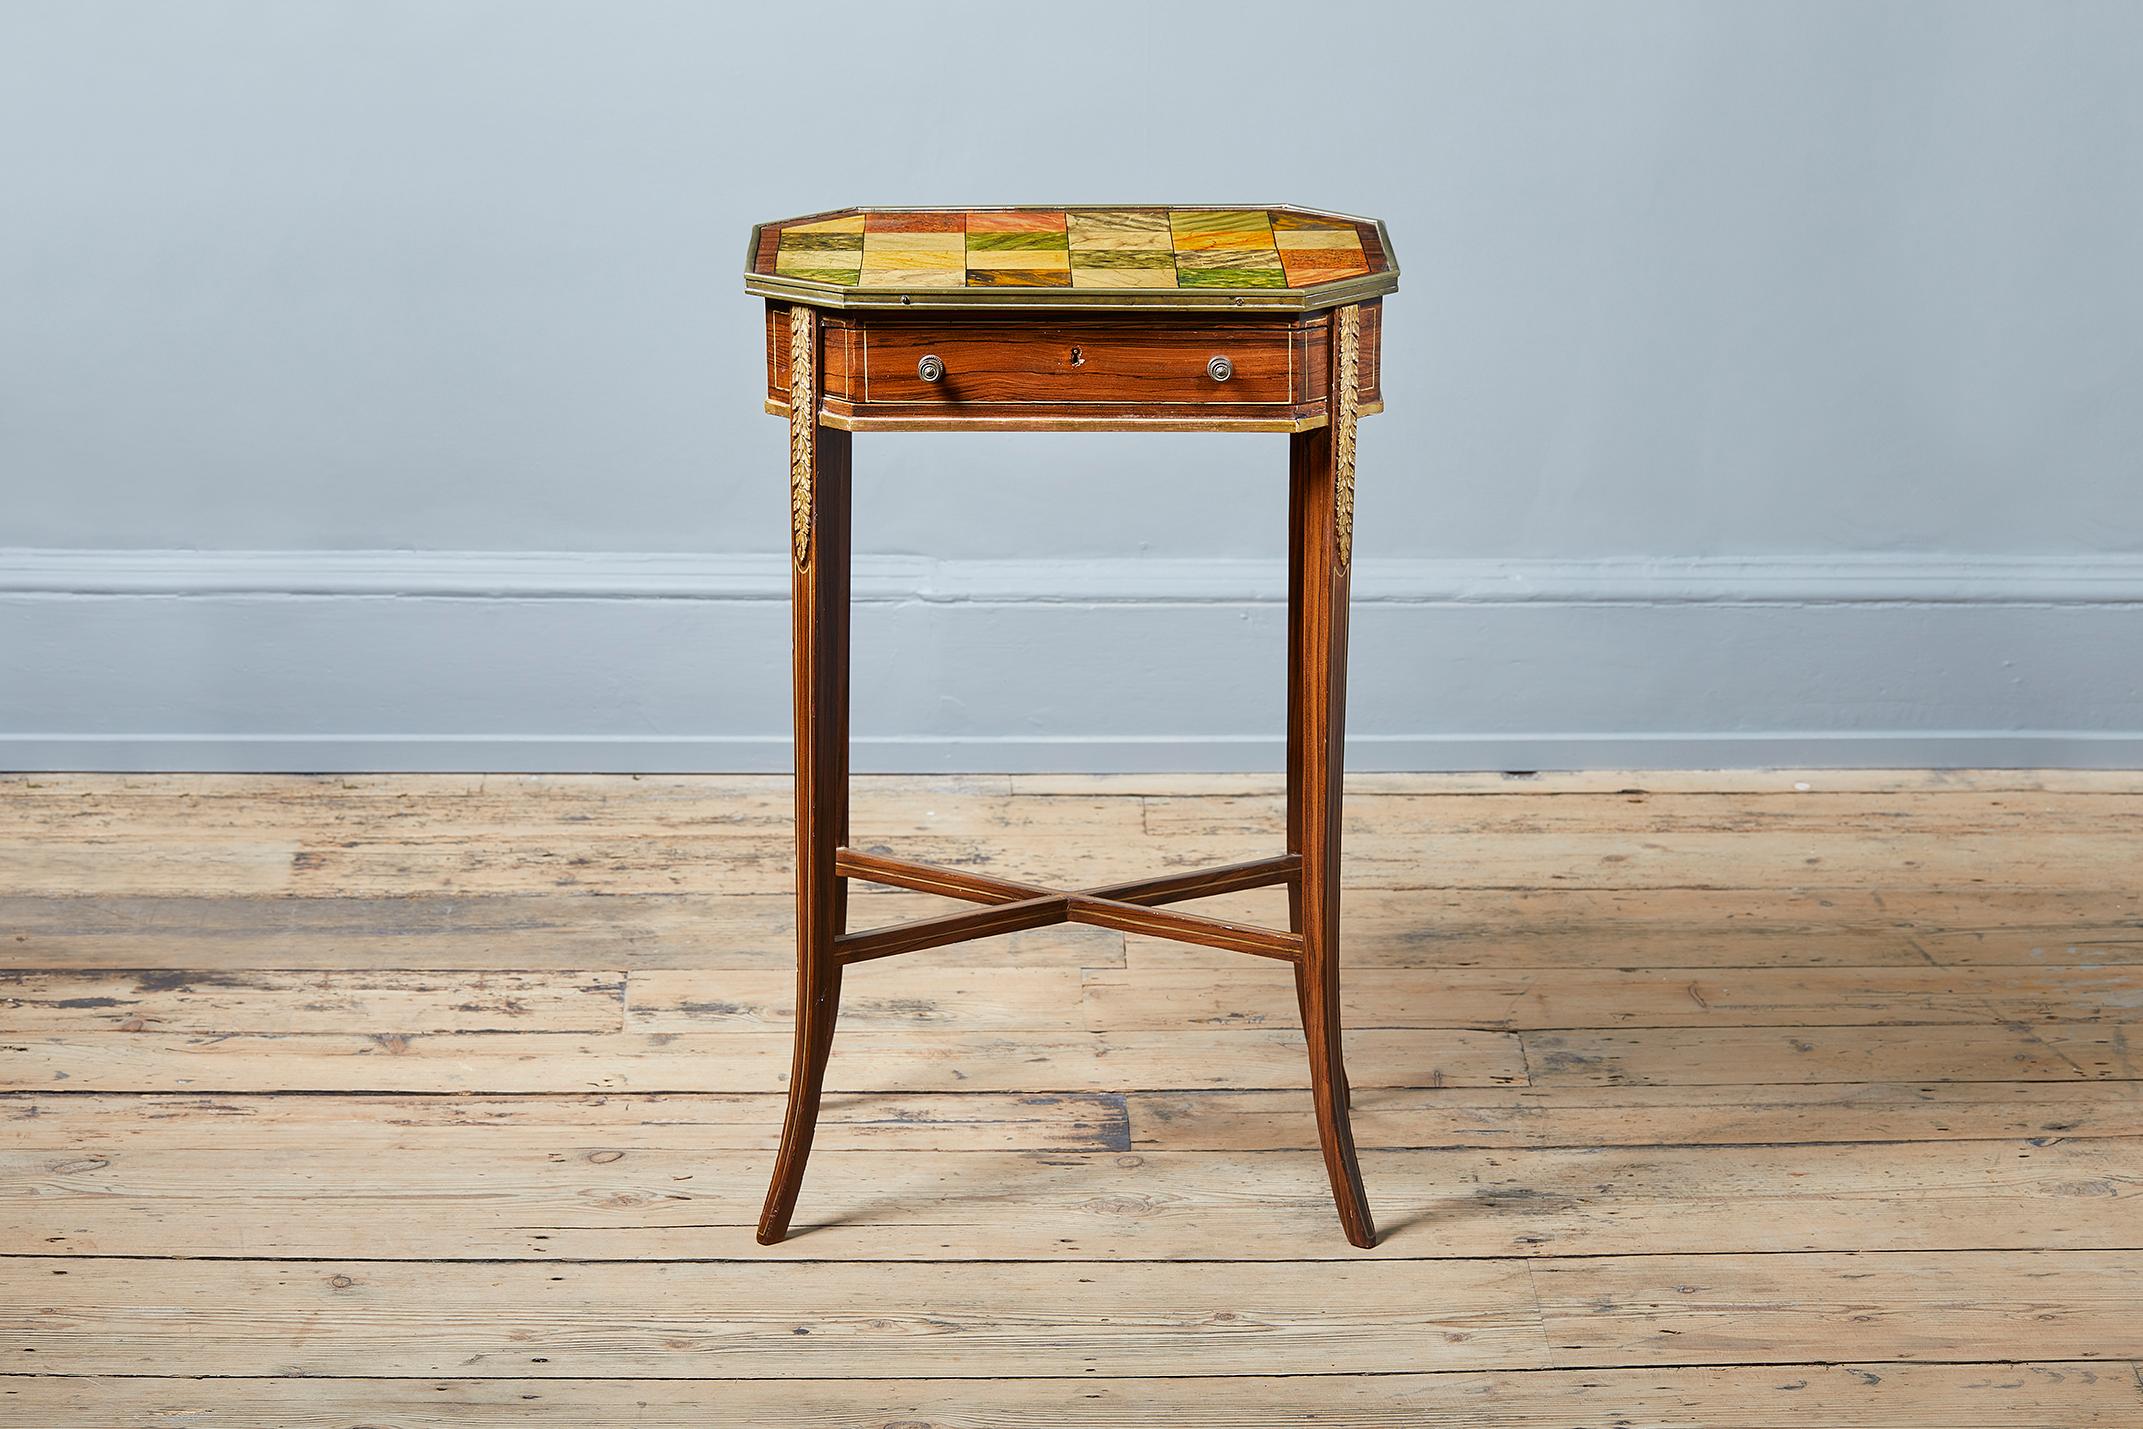 A Regency period occasional table painted to simulate marbles and rosewood, English circa 1790-1810, the canted rectangular top painted in a variety of colors with twenty-four panels to simulate various marbles, with a simulated rosewood outer edge